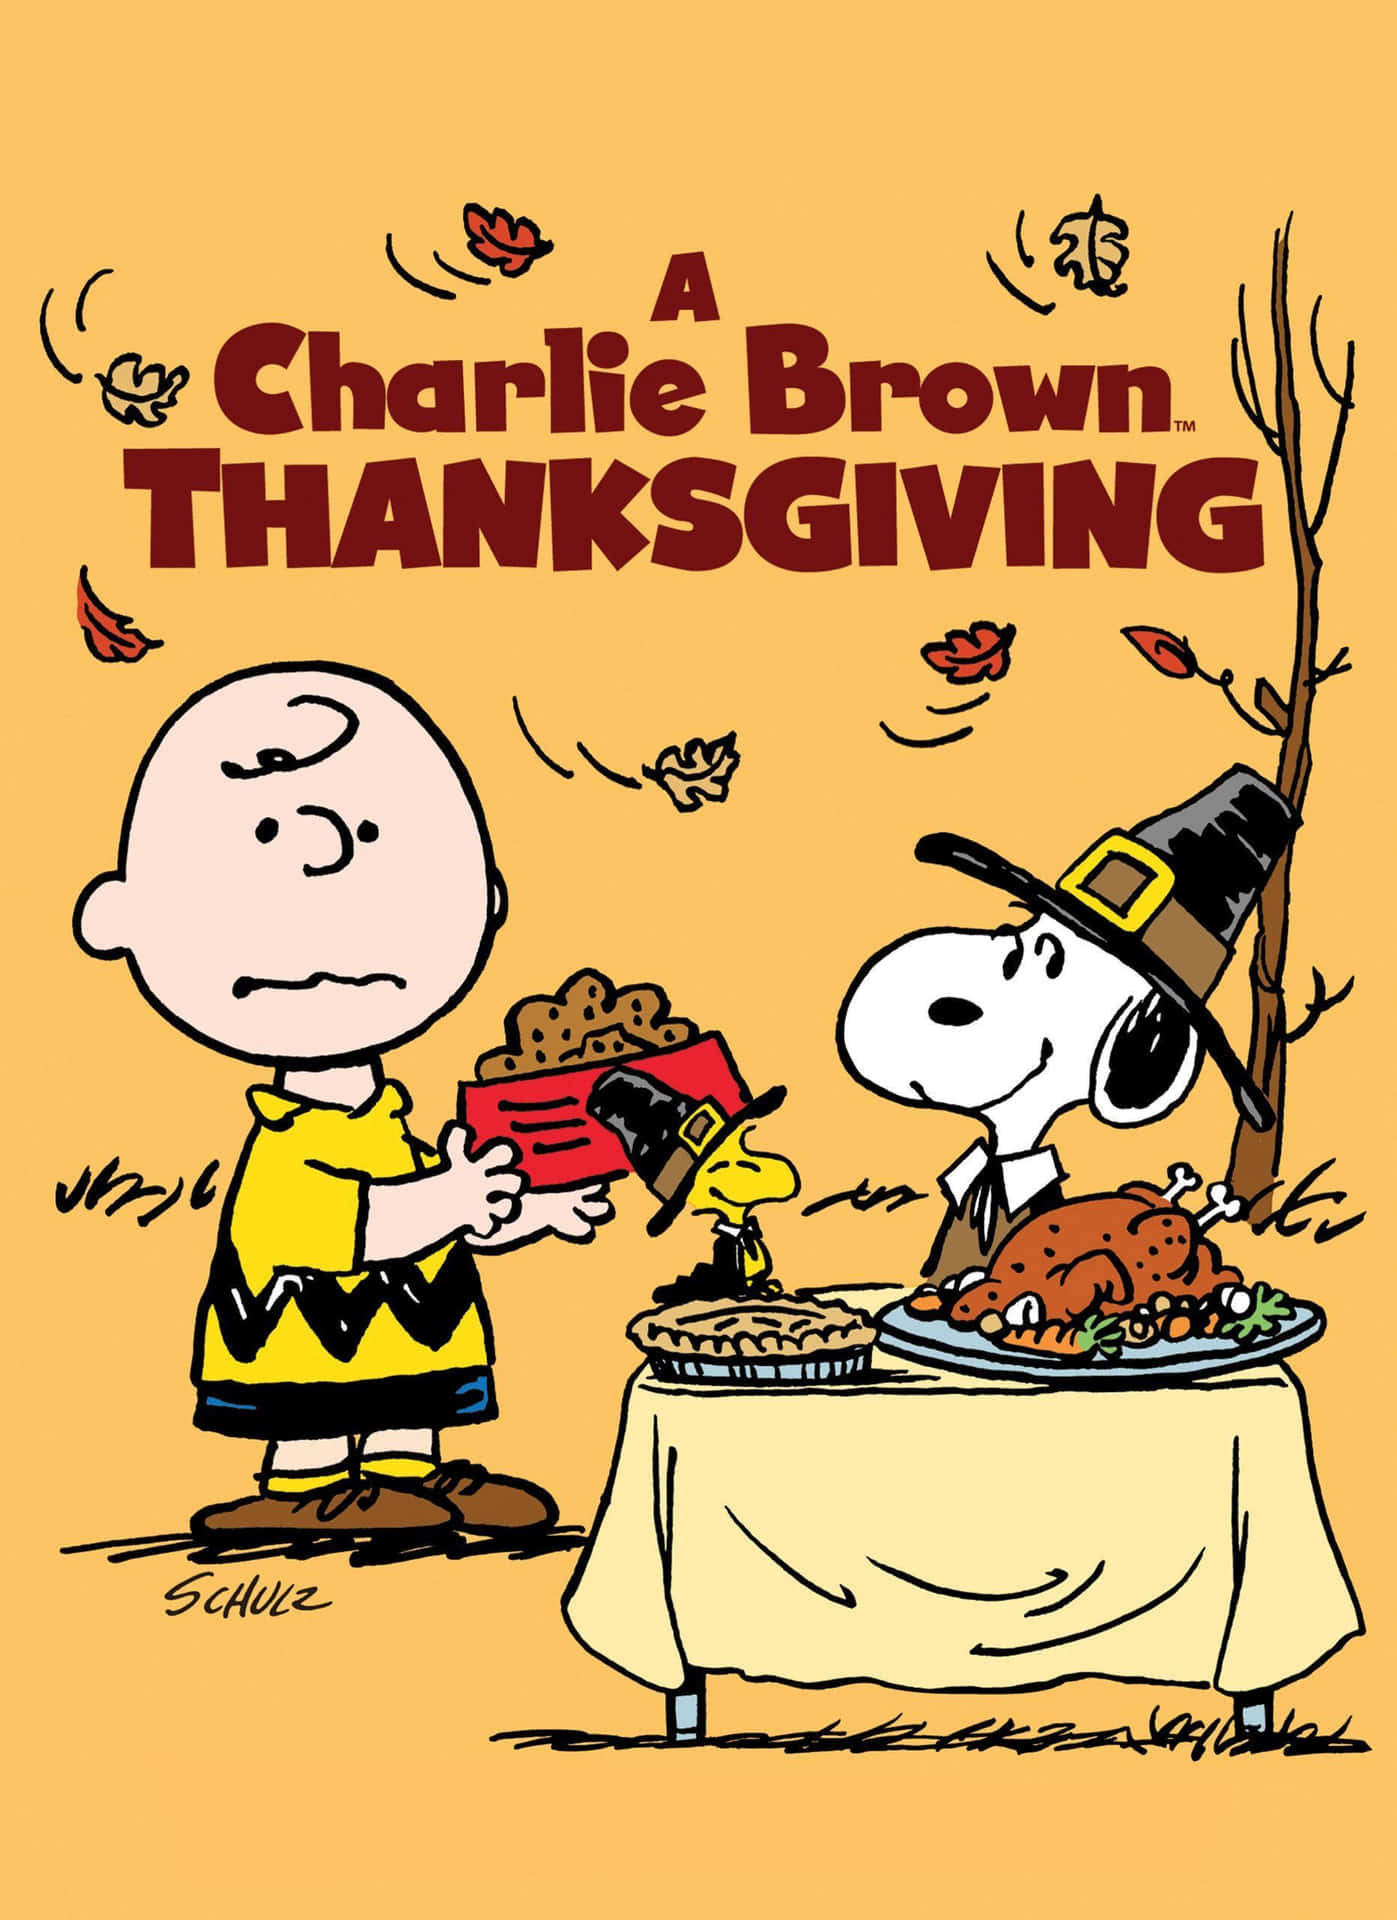 Celebrate Thanksgiving with Charlie Brown and the gang! Wallpaper